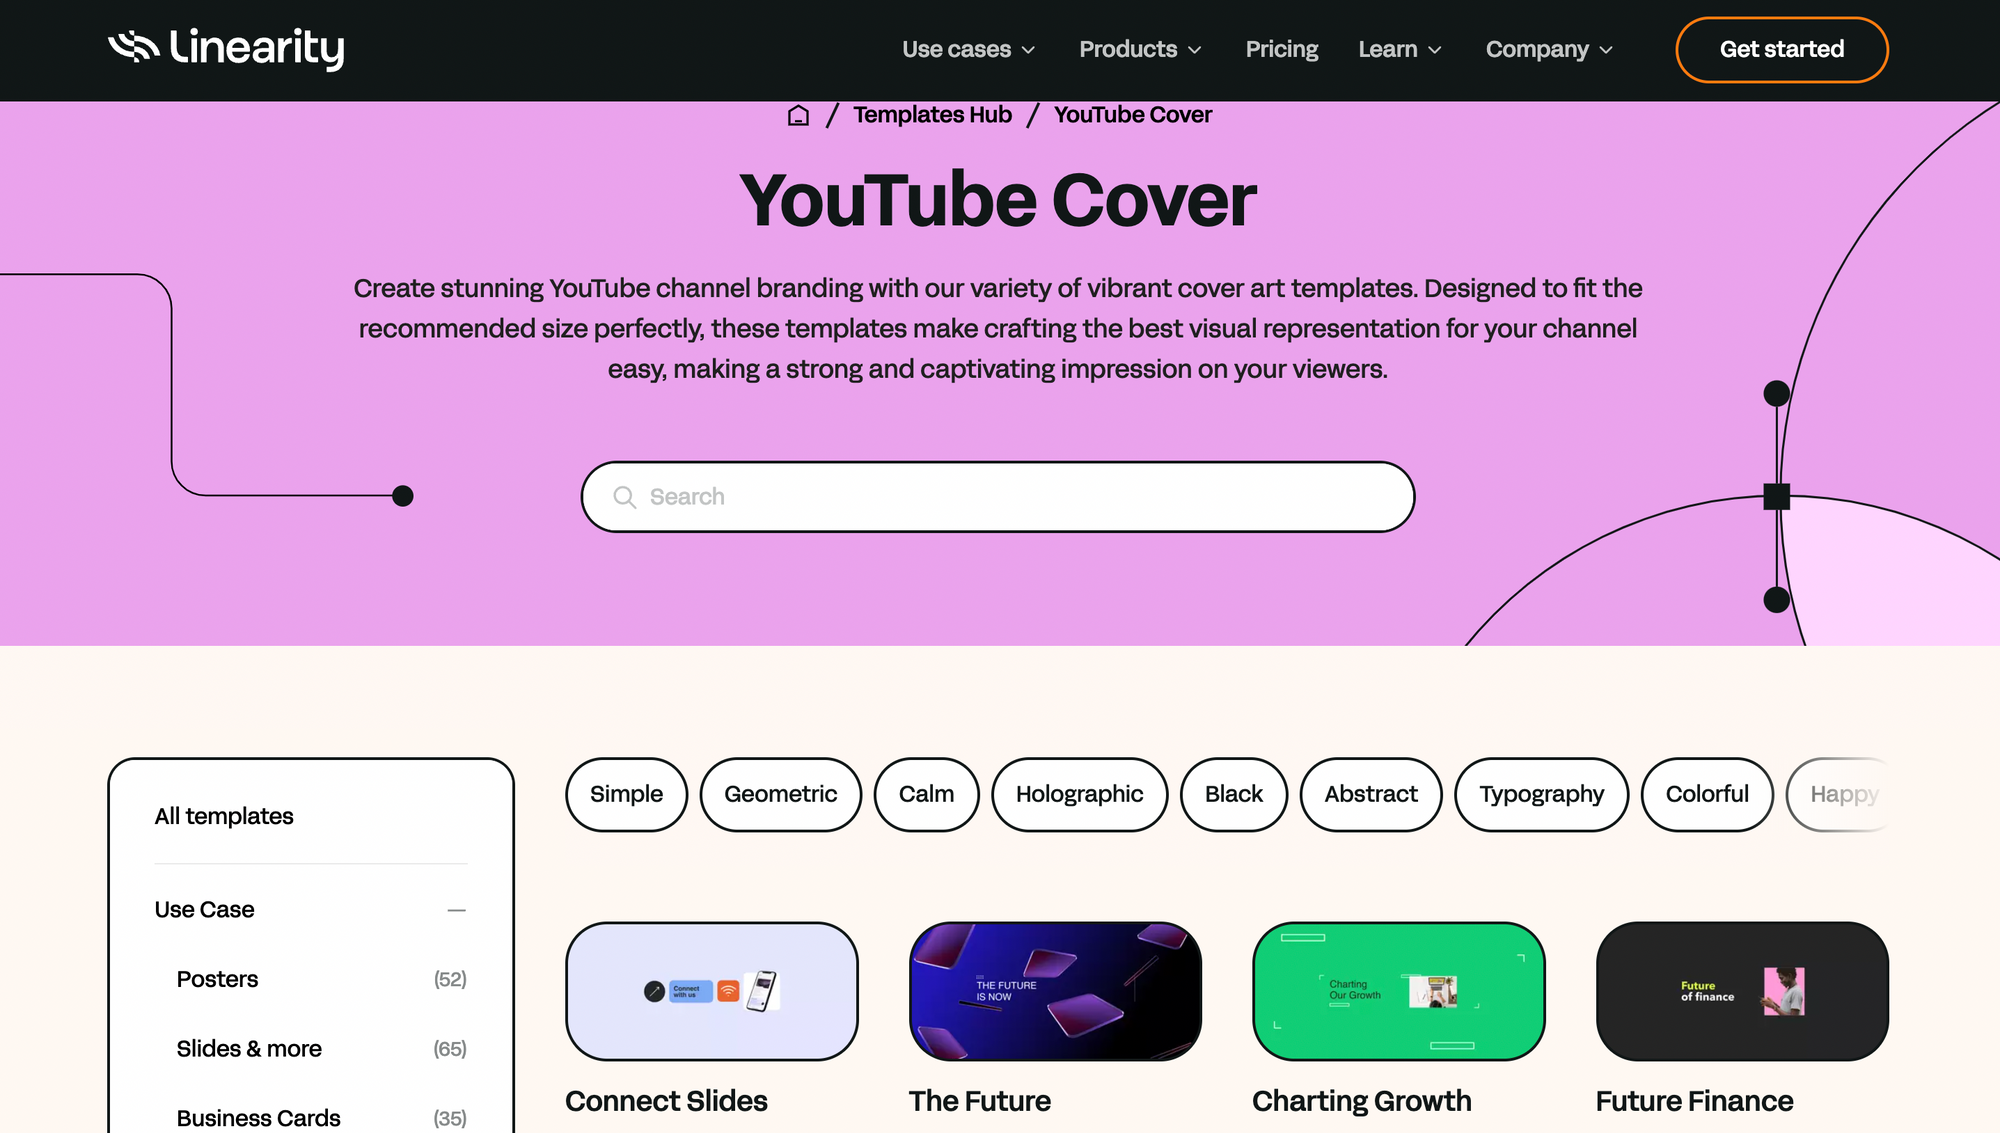 Linearity's YouTube Cover template collection page